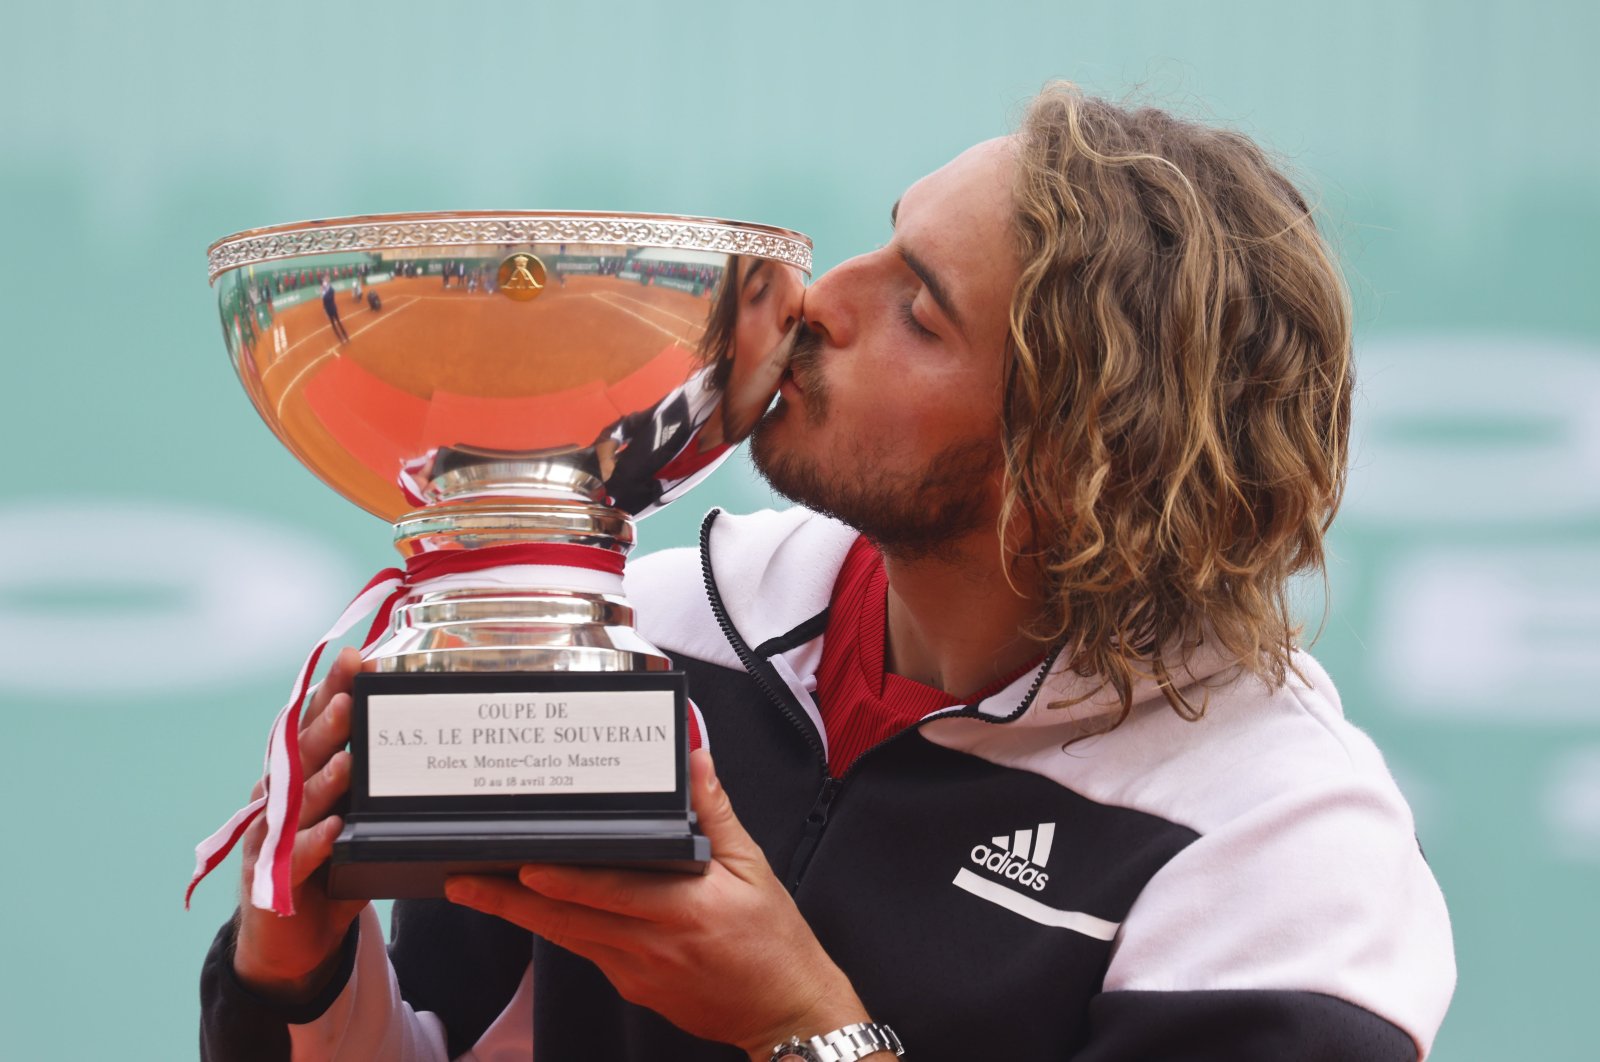 Greece's Stefanos Tsitsipas celebrates with the Monte Carlo Masters trophy after winning the final against Russia's Andrey Rublev, Roquebrune-Cap-Martin, France, April 18, 2021.